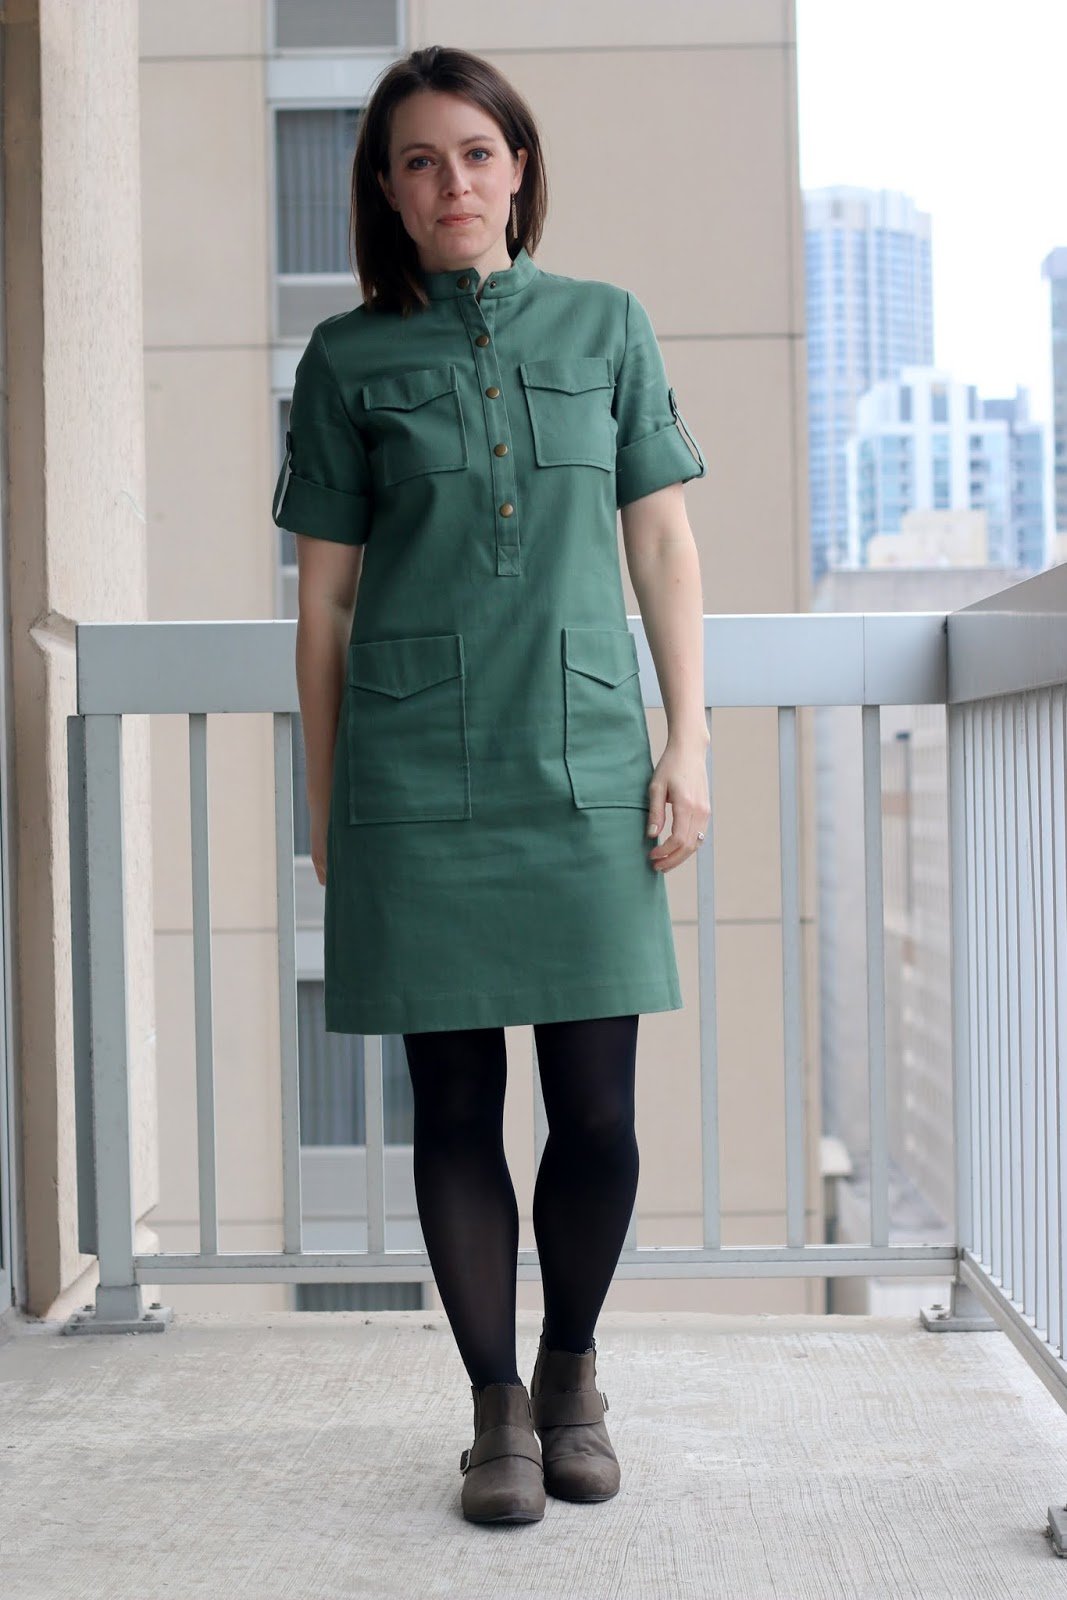 Thrifted Emerson Fry green dress with tights and gray boots | Made in the USA | wear to work outfit, office style, business casual to brunch